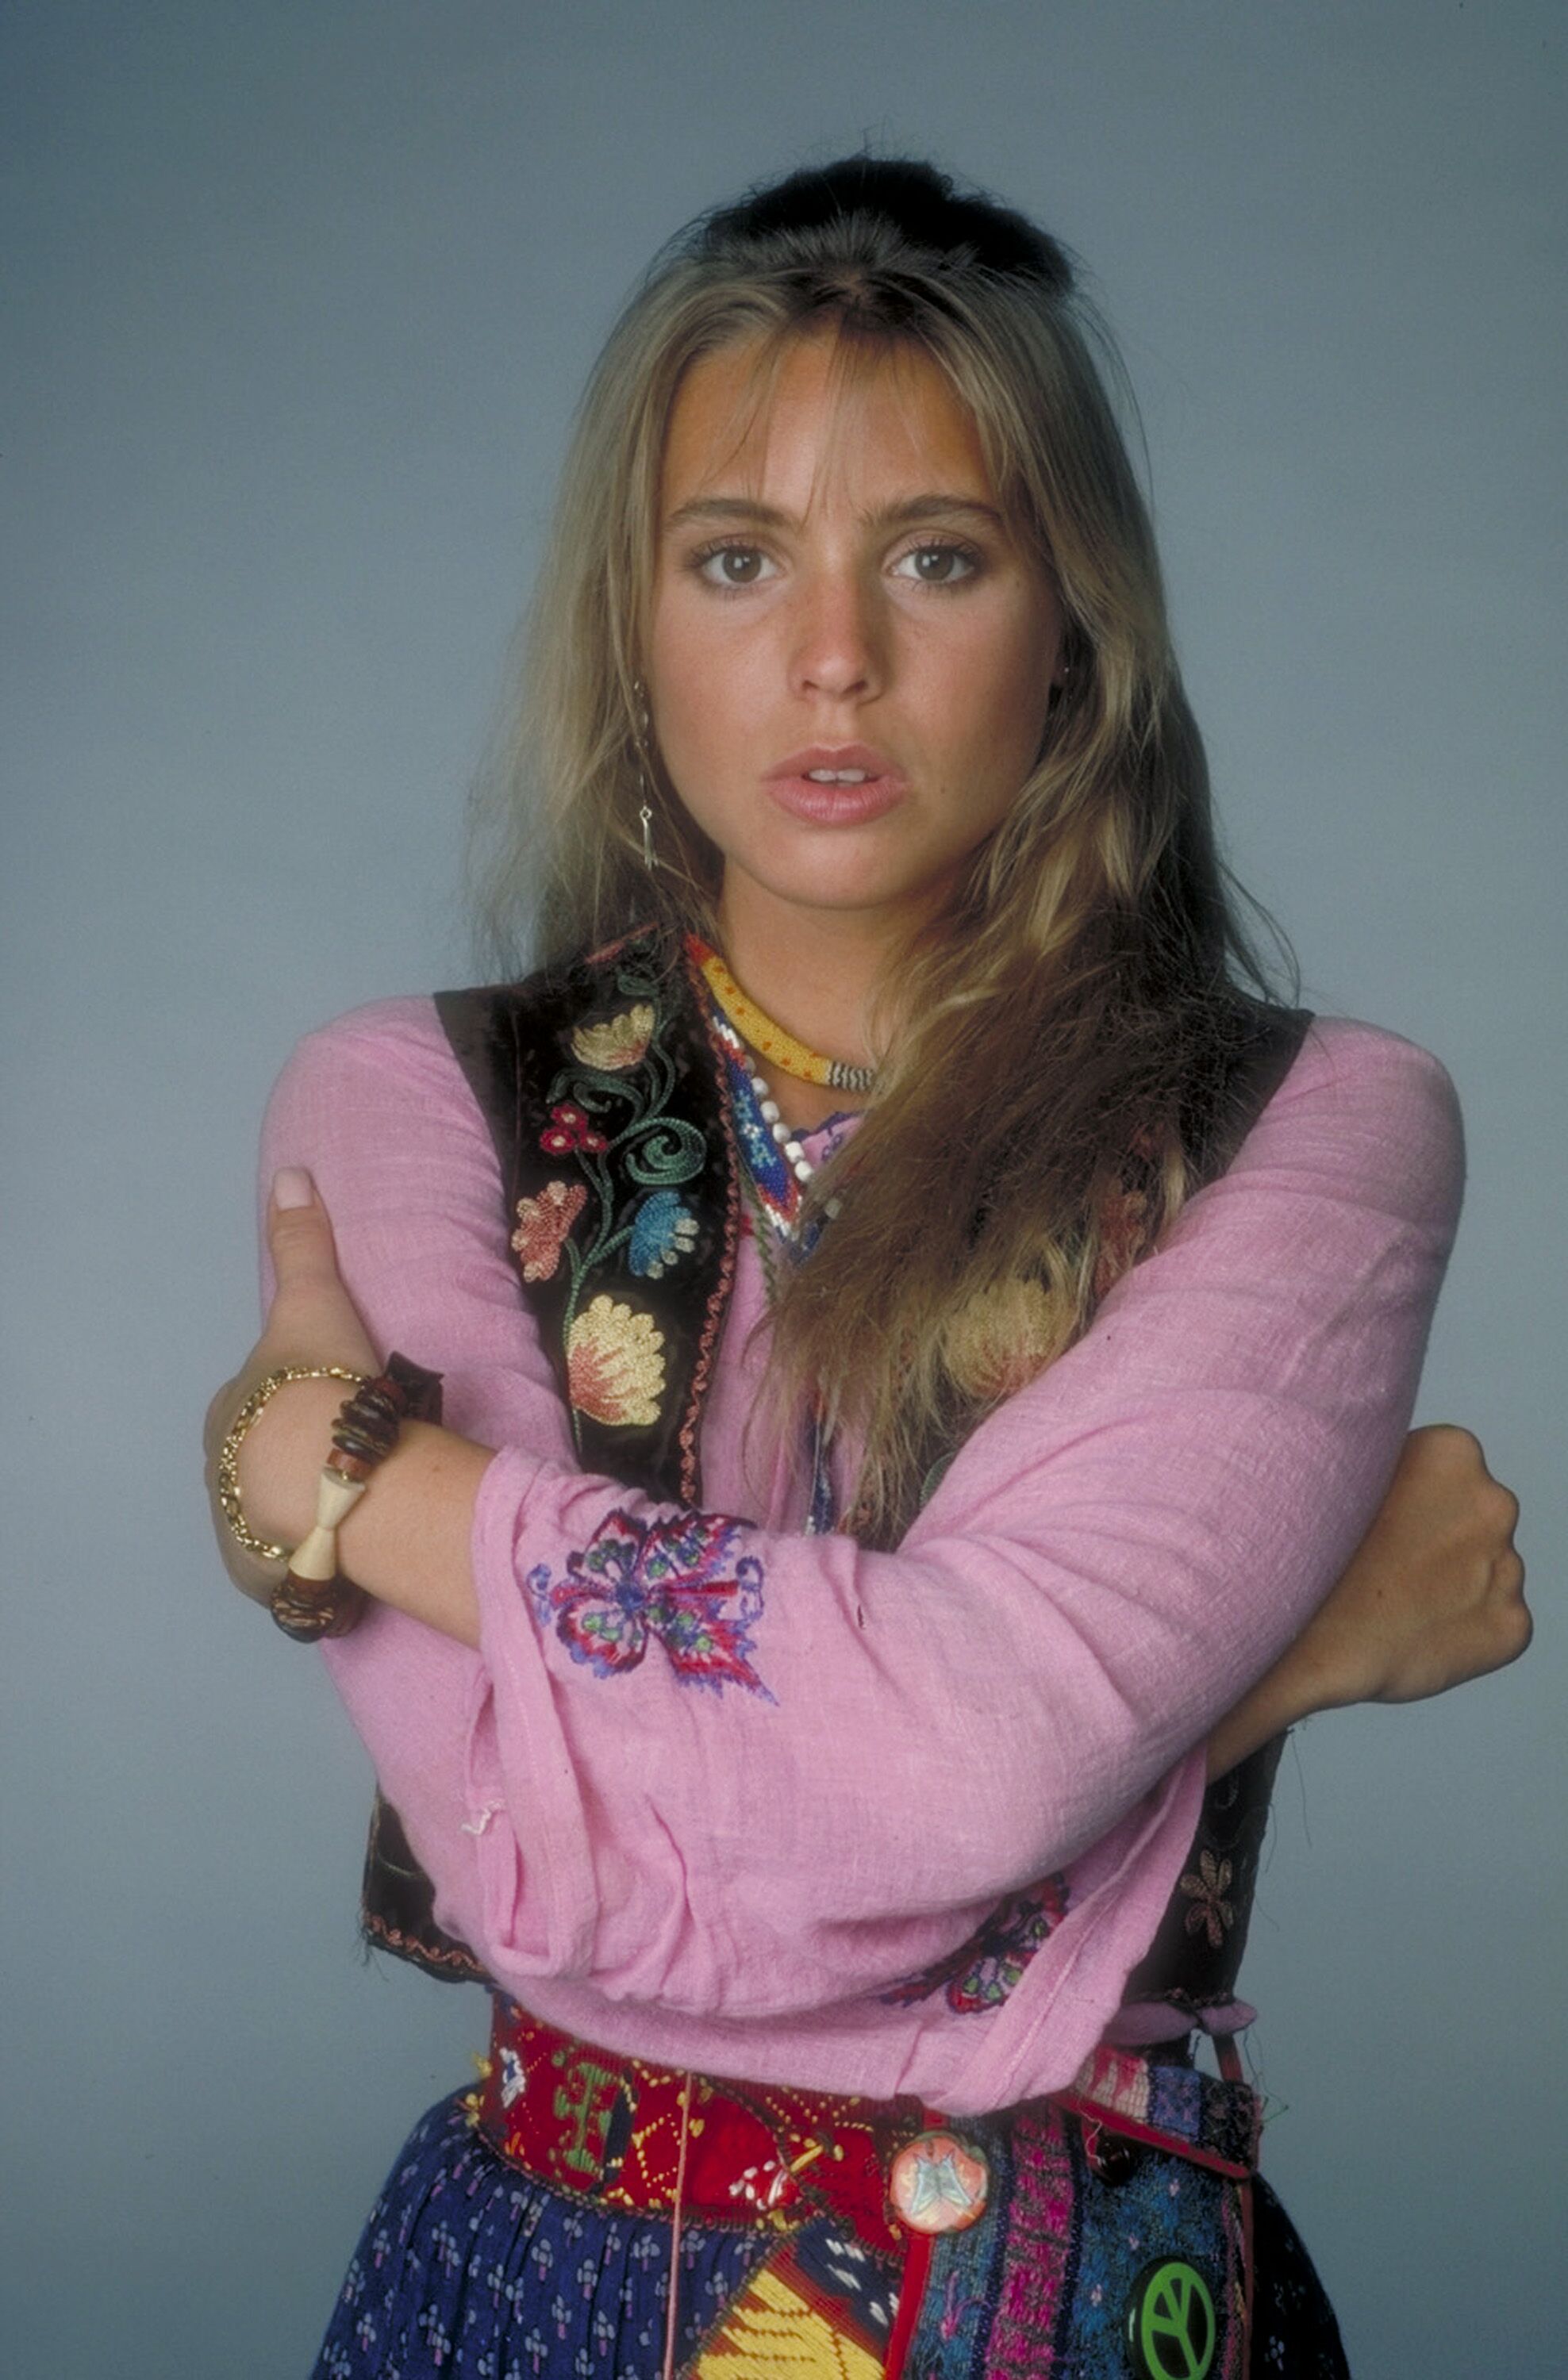 Olivia D'Abo as Karen in "The Wonder Years" circa 1988 | Source: Getty Images 